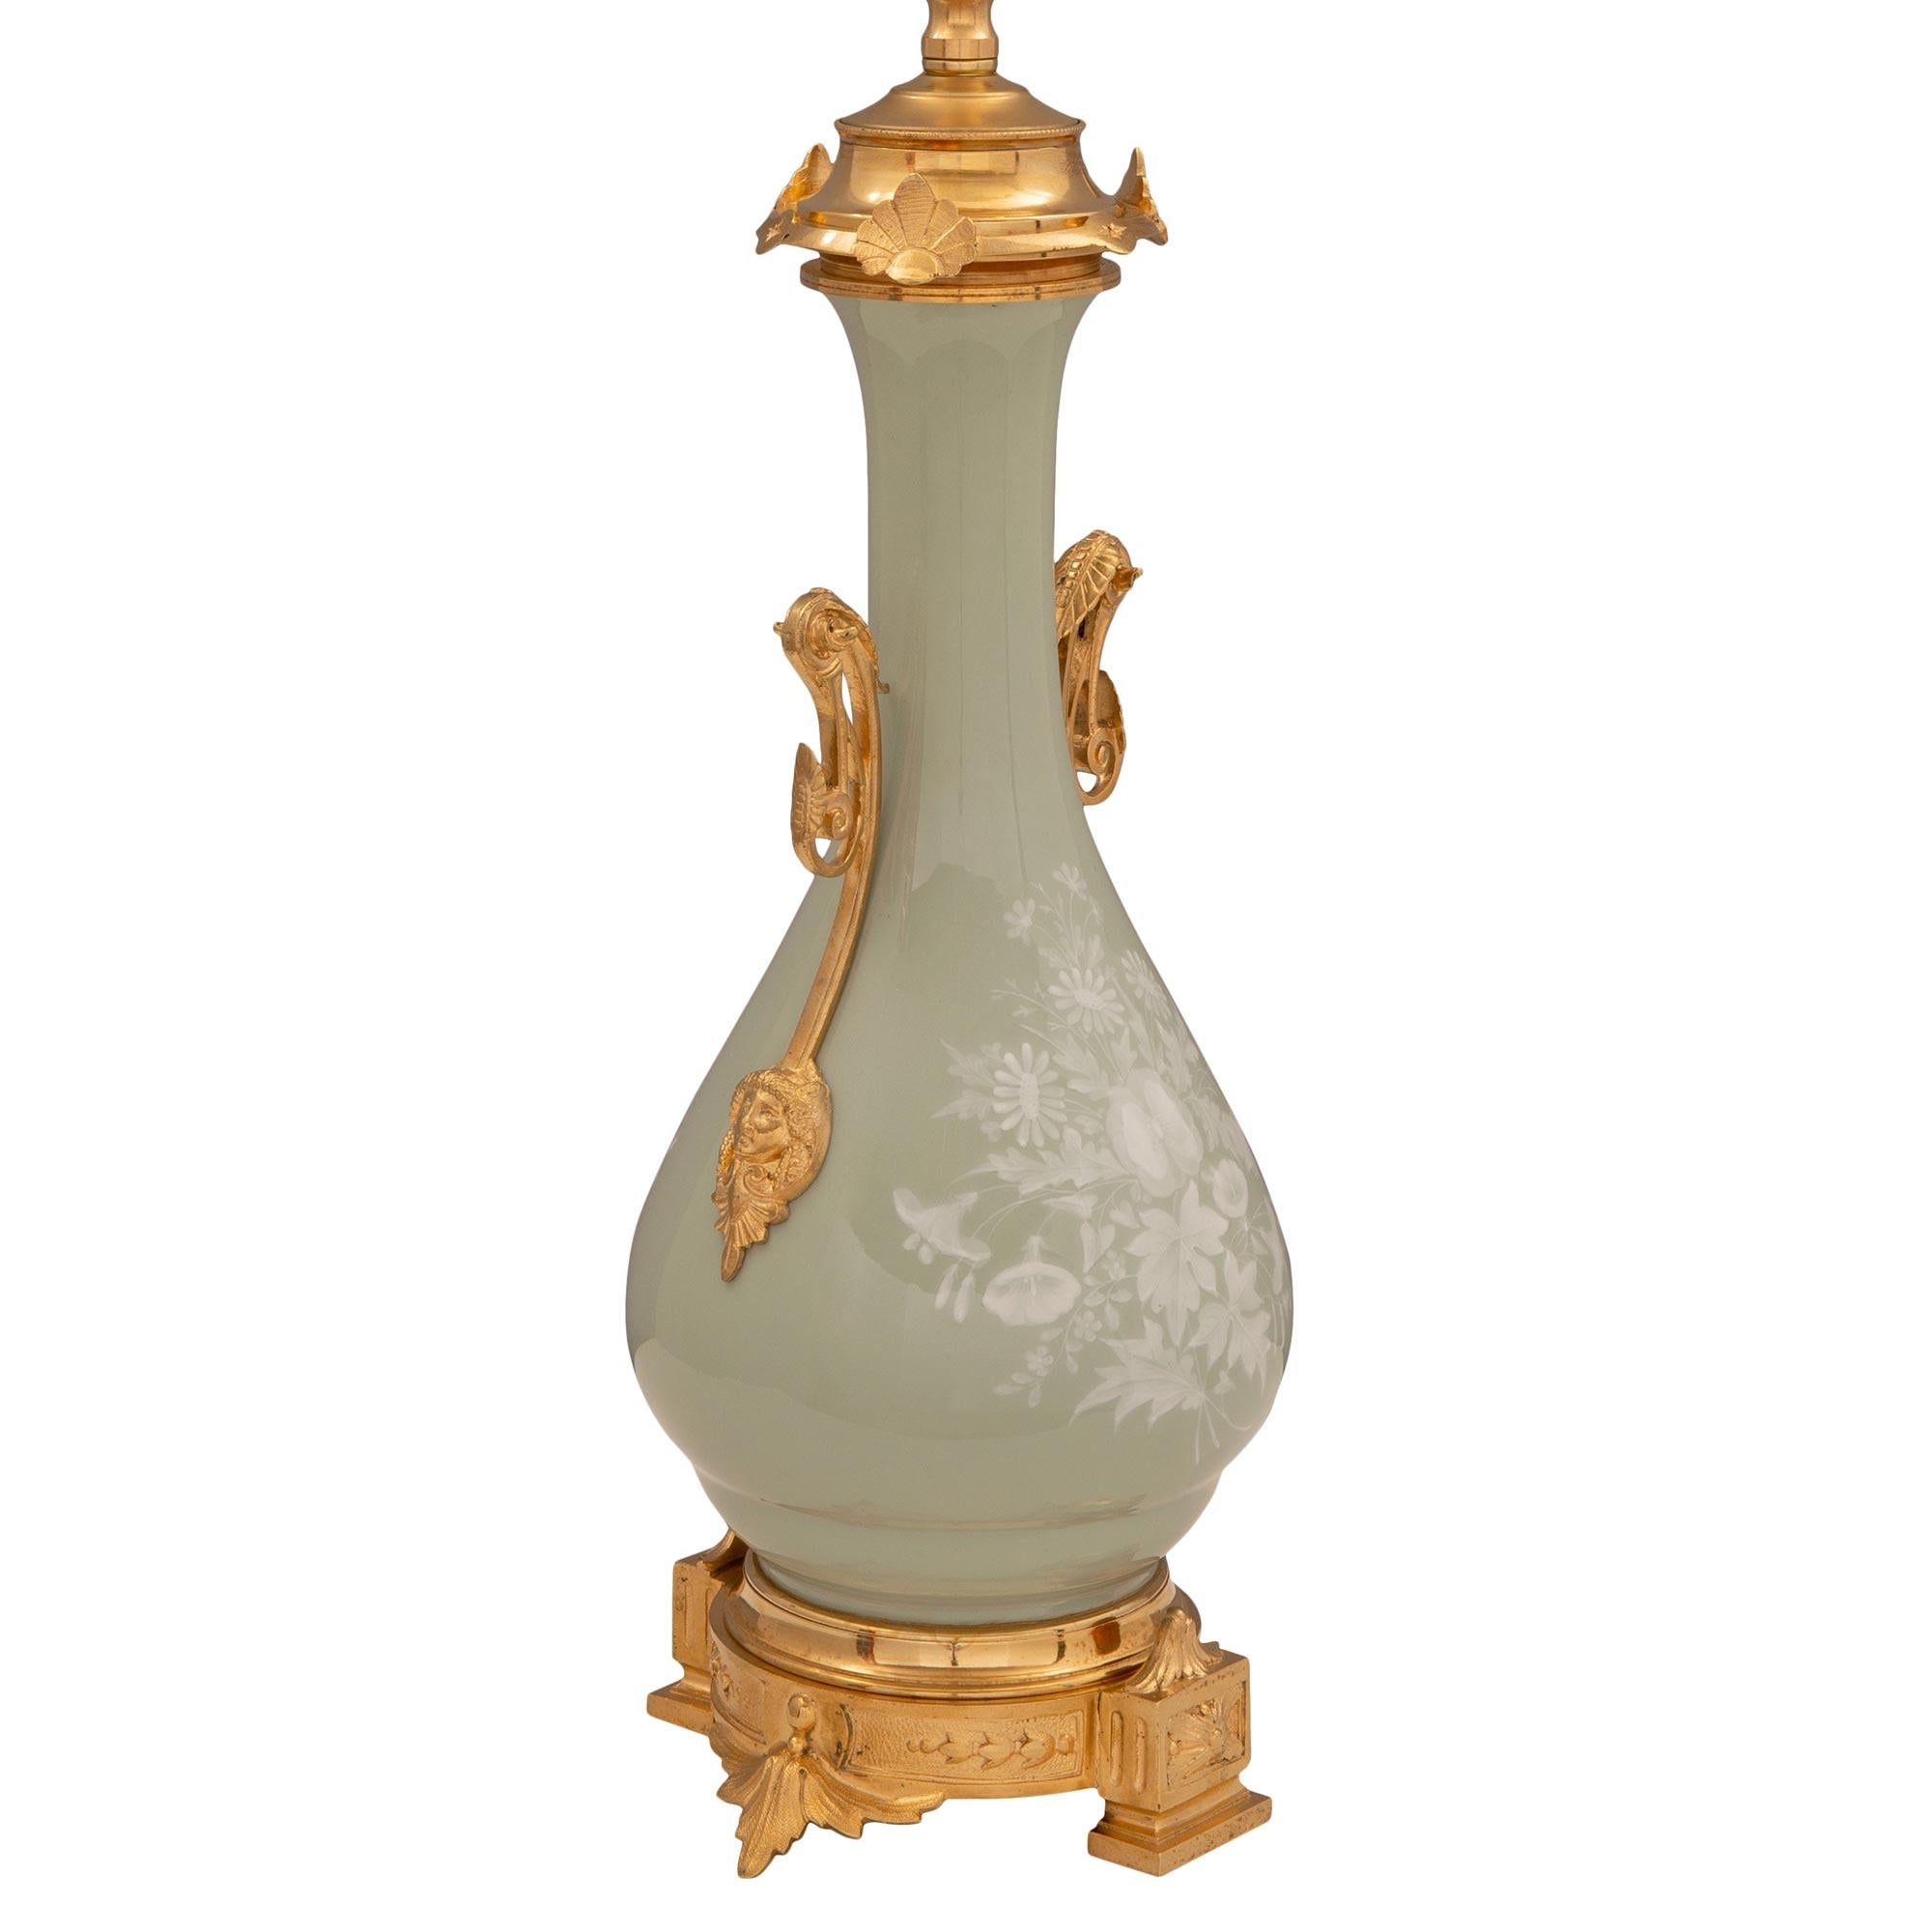 A beautiful and extremely decorative French 19th century Renaissance st. Pâte sur Pâte celadon colored porcelain and ormolu lamp. The lamp is raised by a beautiful finely detailed circular ormolu base with mottled block feet at the front and back